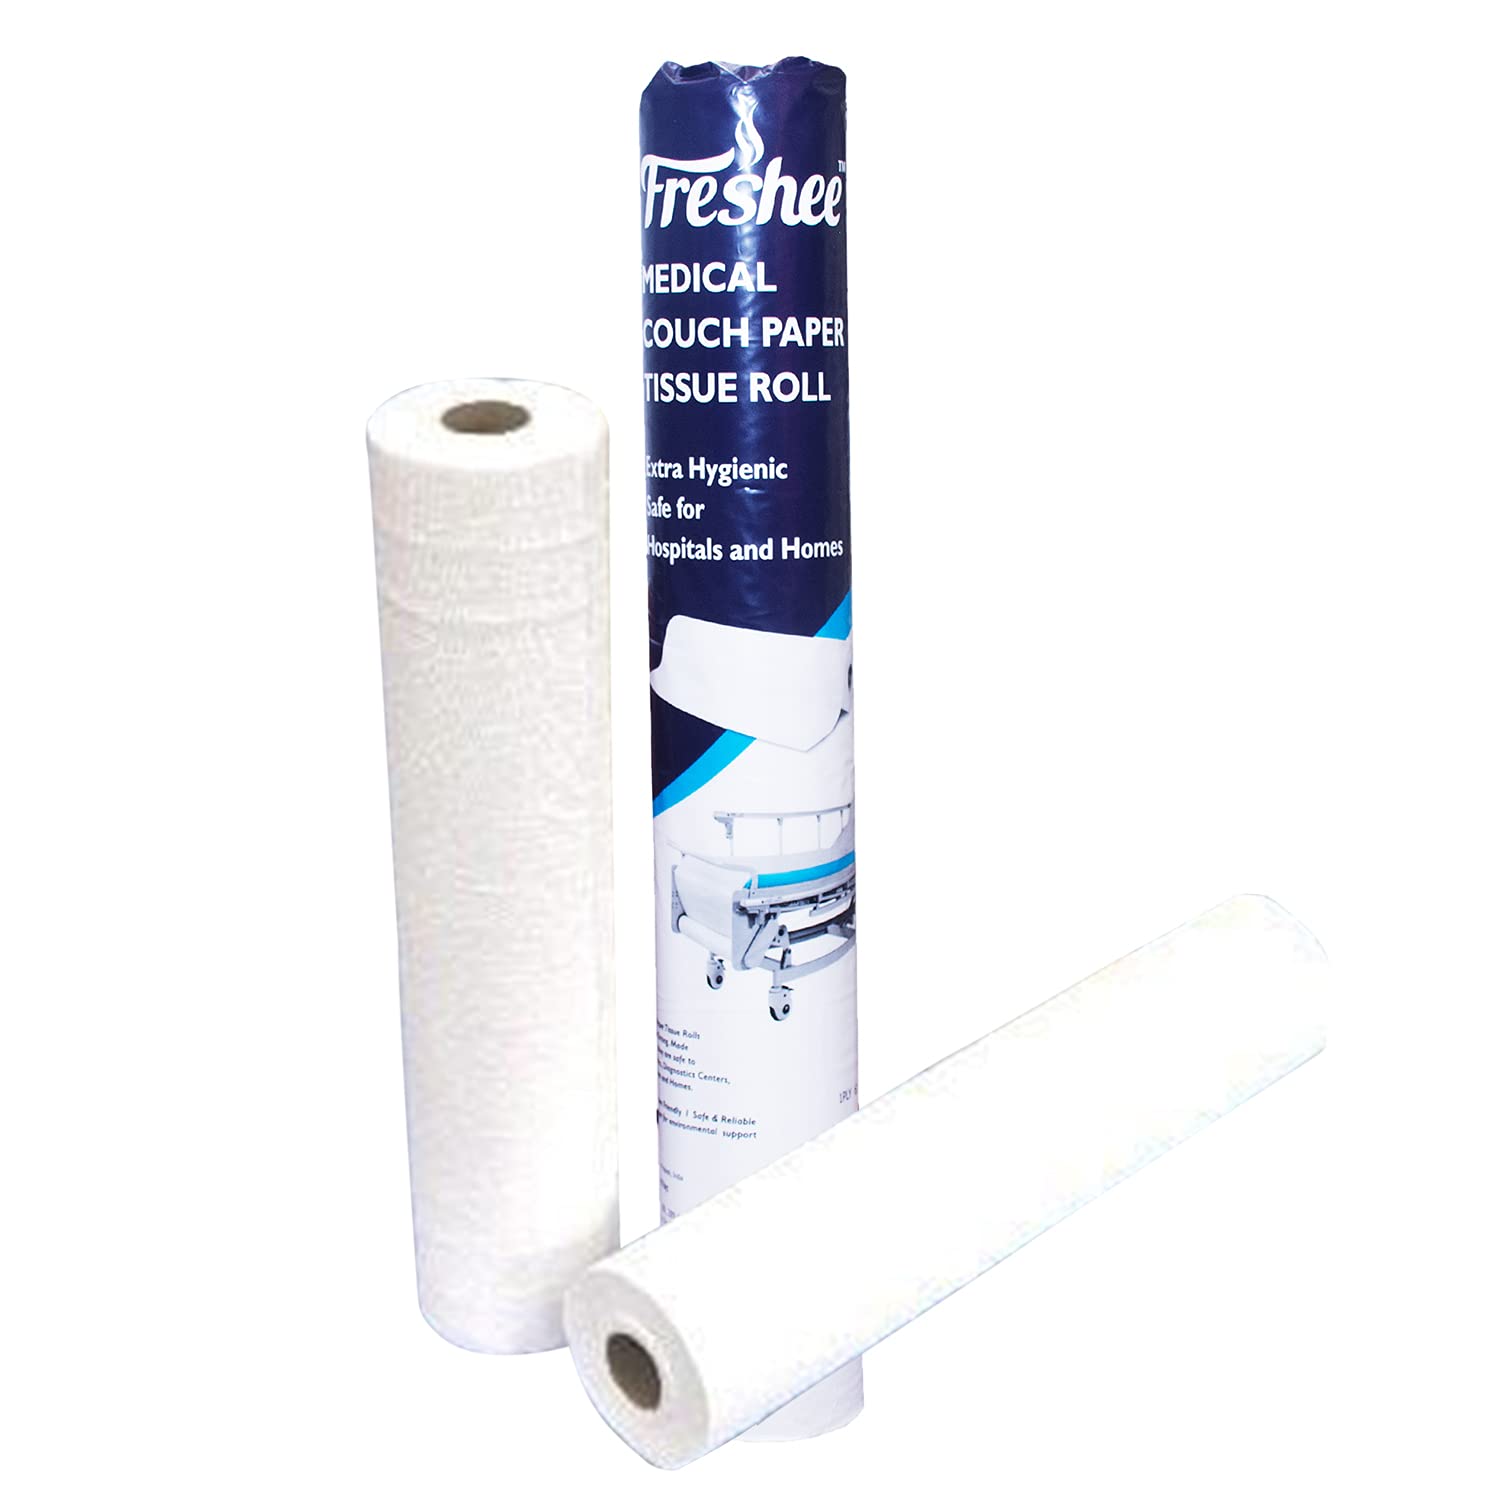 Freshee Medical Couch Paper Tissue Roll